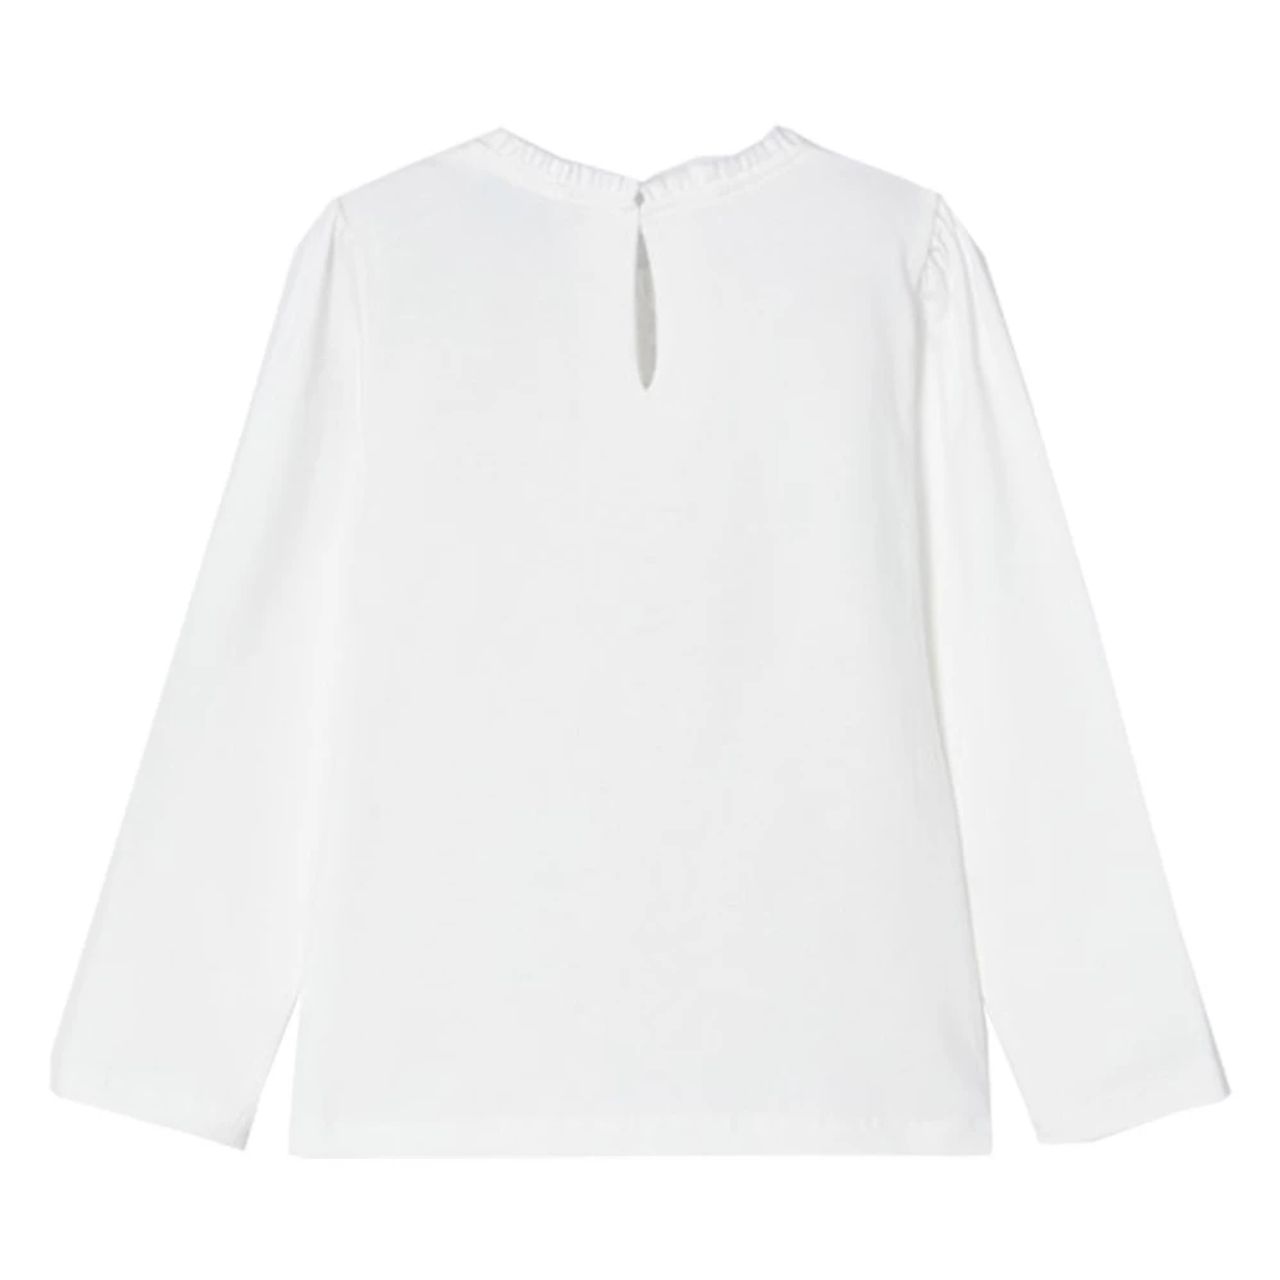 Mayoral meisjes shirt 4025 off-white